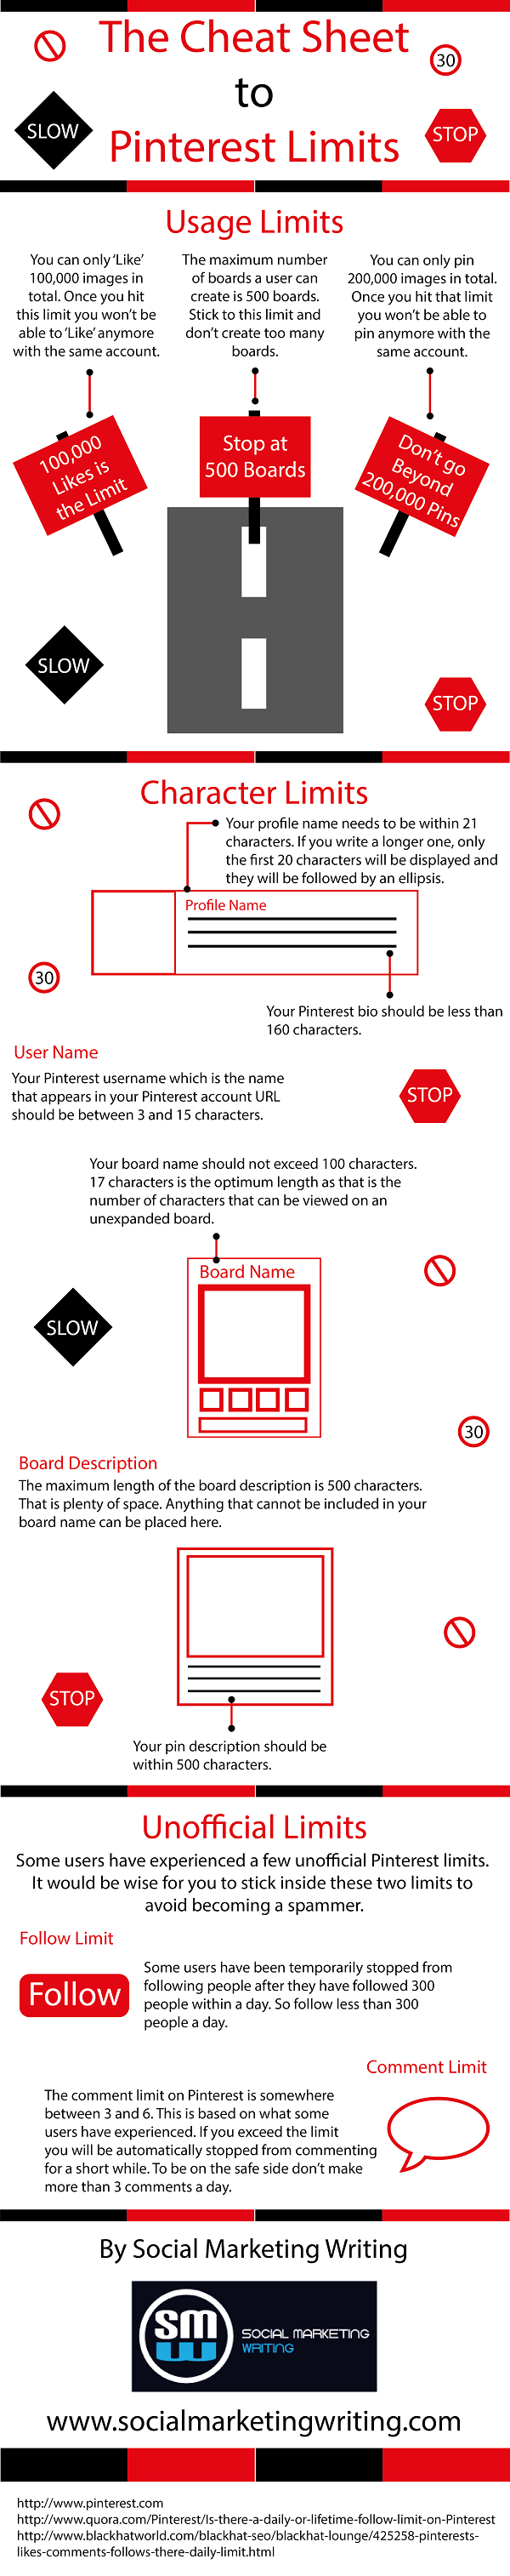 The Cheat Sheet to Pinterest Limits [Infographic]